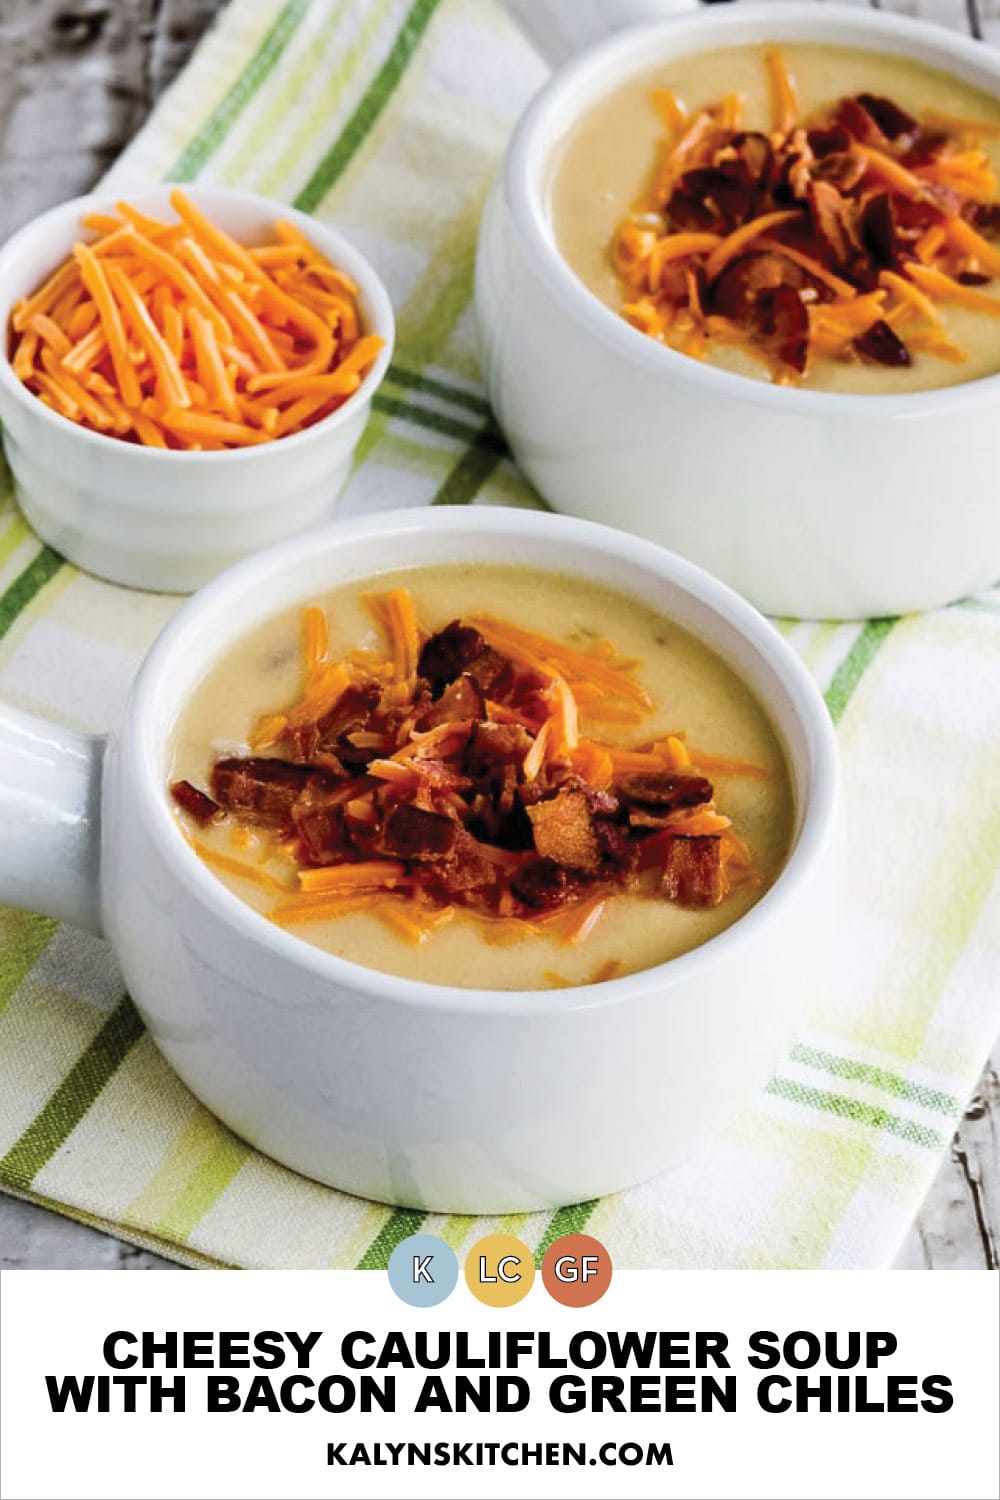 Pinterest image of Cheesy Cauliflower Soup with Bacon and Green Chiles